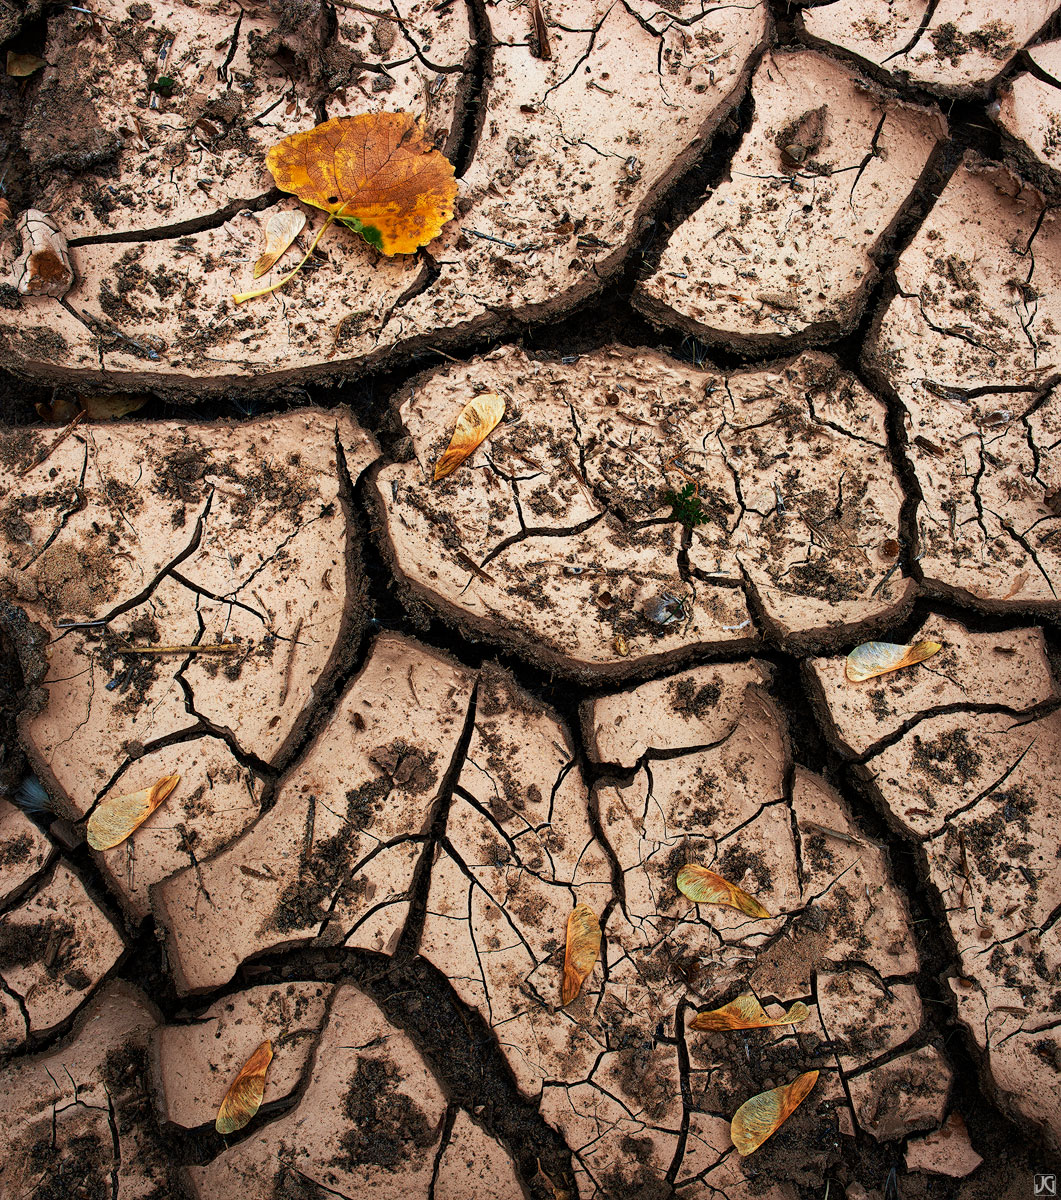 Mud cracks and hints of autumn along a stream bed.